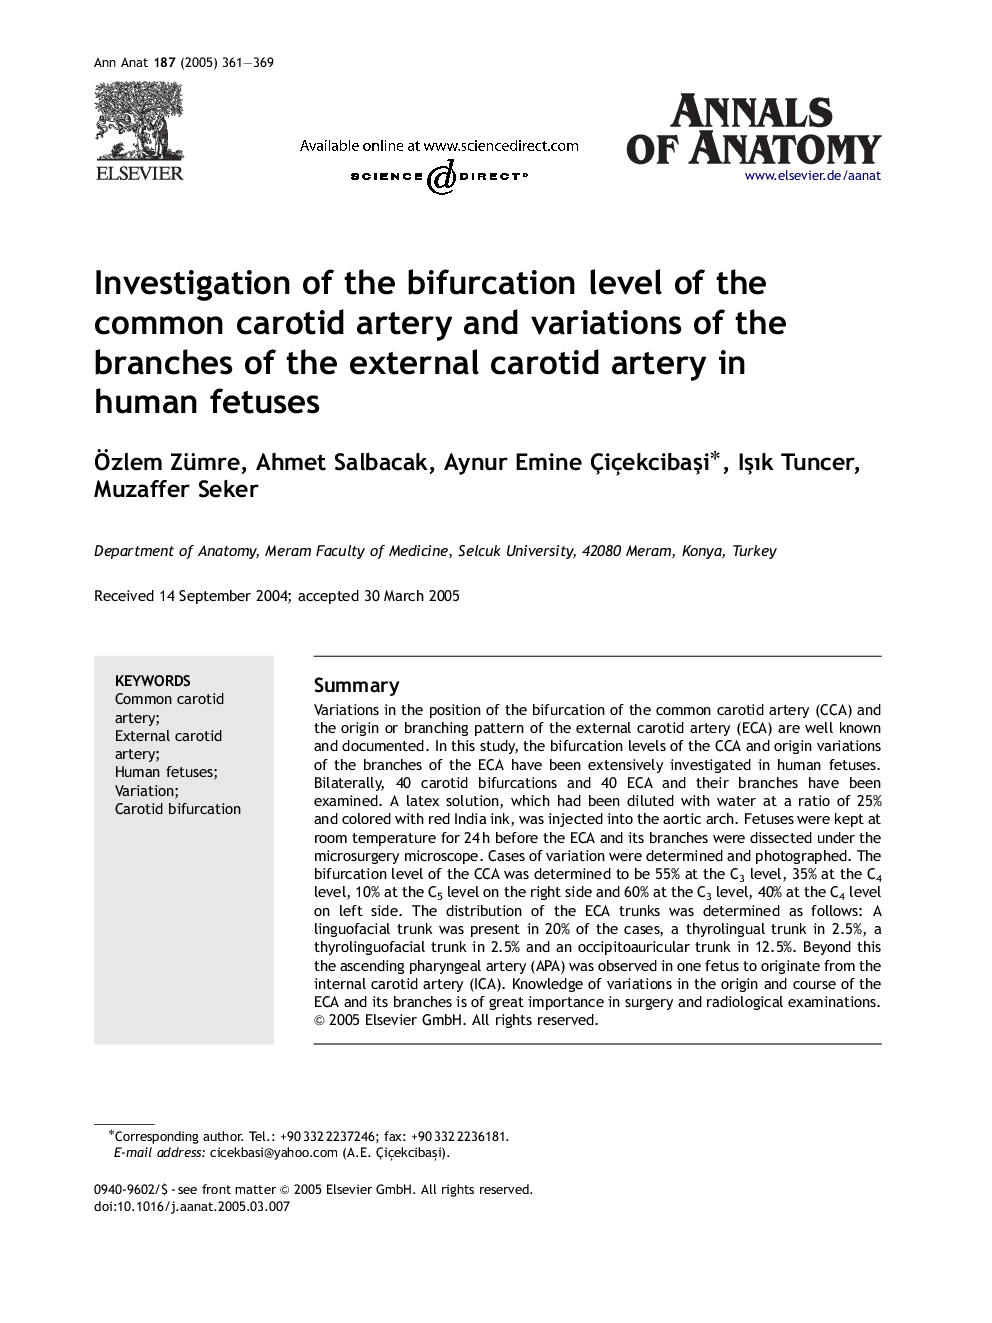 Investigation of the bifurcation level of the common carotid artery and variations of the branches of the external carotid artery in human fetuses